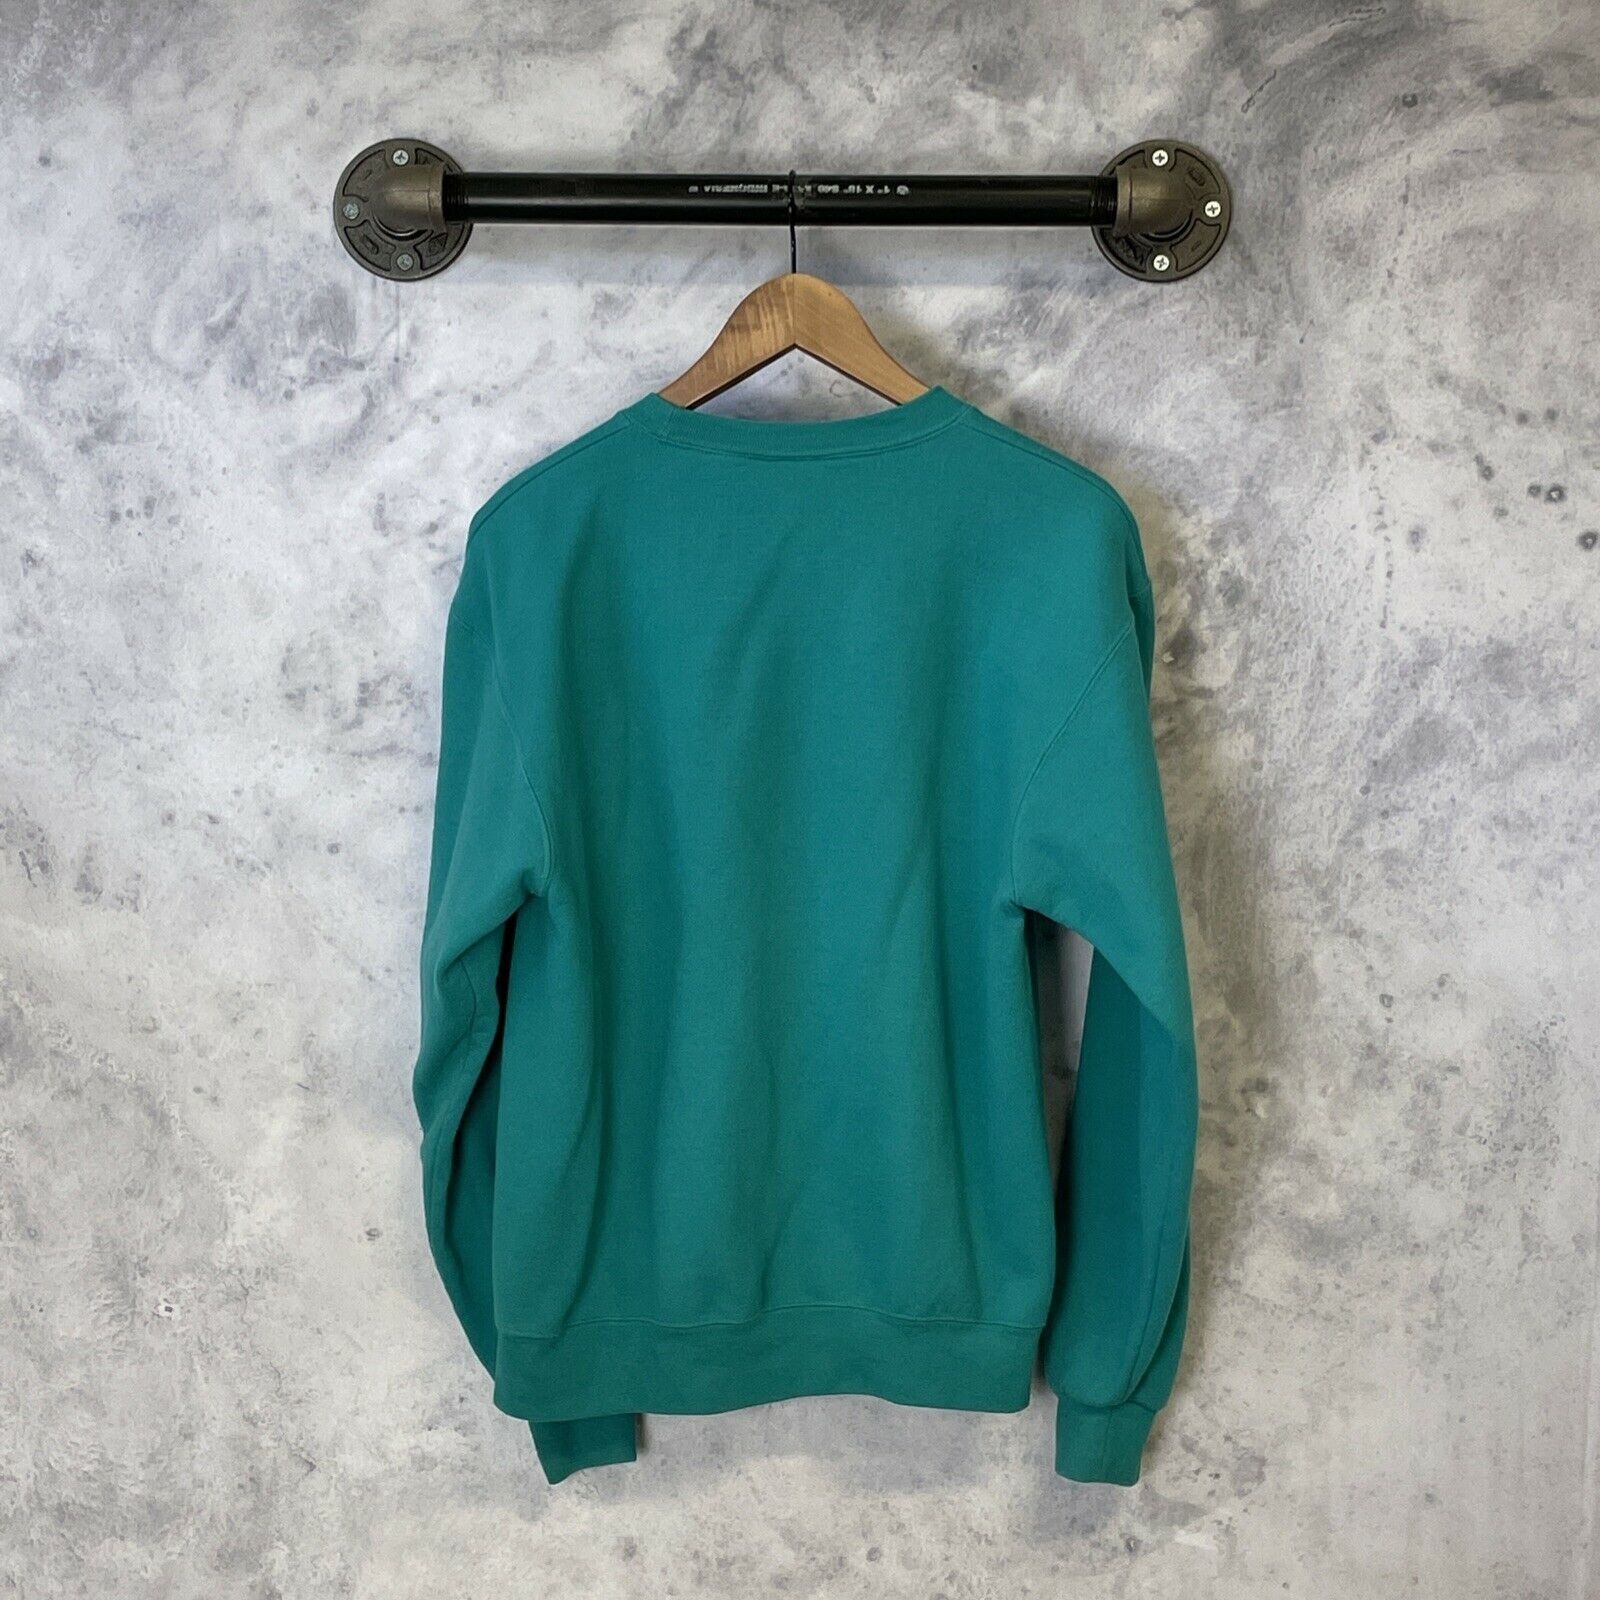 Champion Champion ECO Blank Pullover Sweatshirt Solid Teal Stained M Size US M / EU 48-50 / 2 - 2 Preview